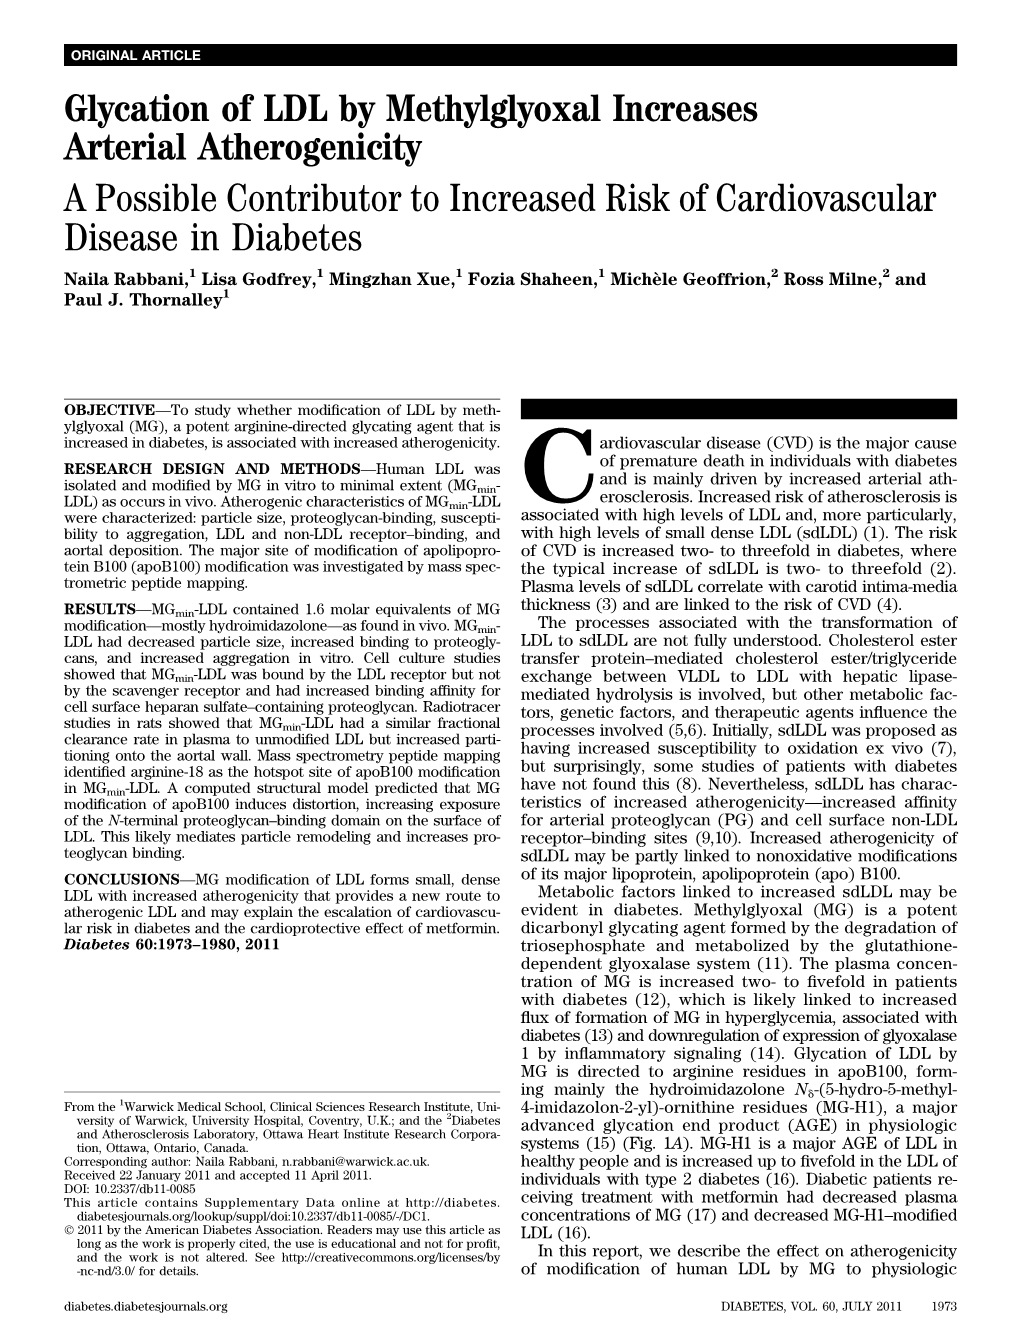 A Possible Contributor to Increased Risk of Cardiovascular Disease in Diabetes